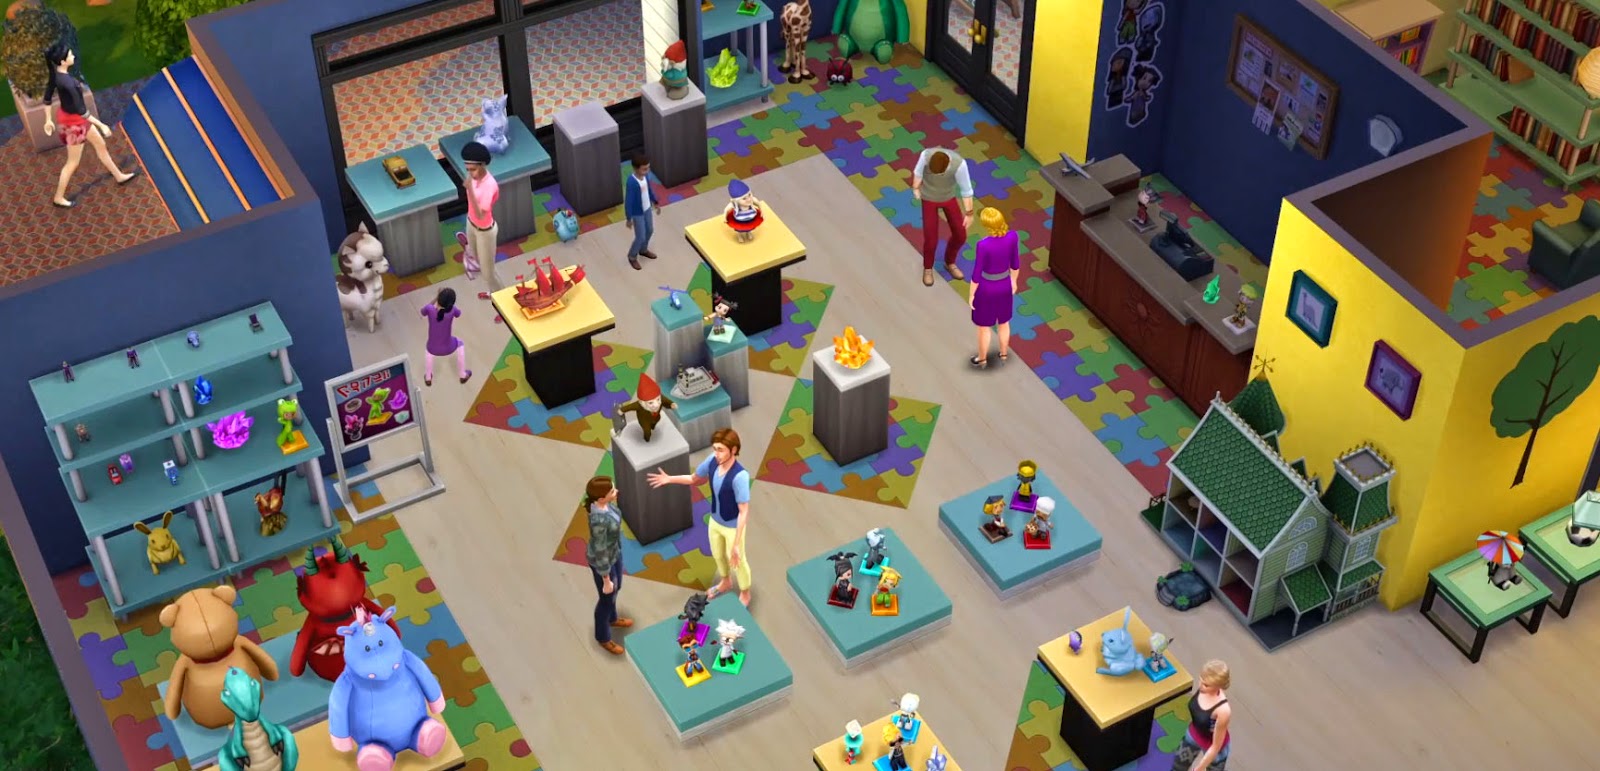 Sims 4 get to work free download - hotlinehohpa